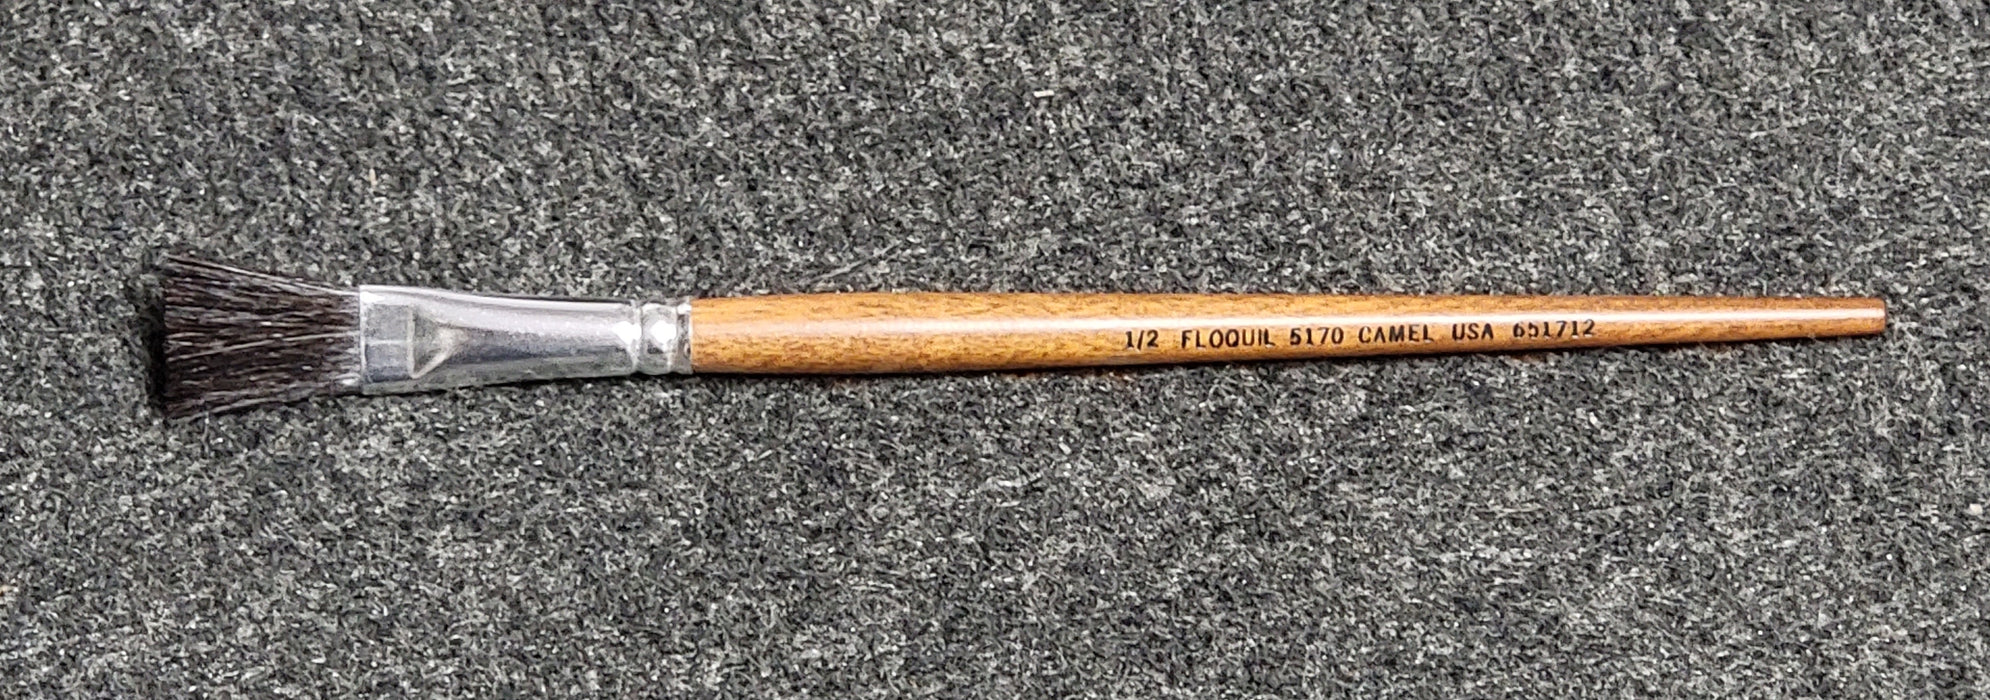 Floquil Poly S 651712 1/2" 5170 Camel Hair Flat Lacquer Paint Brush